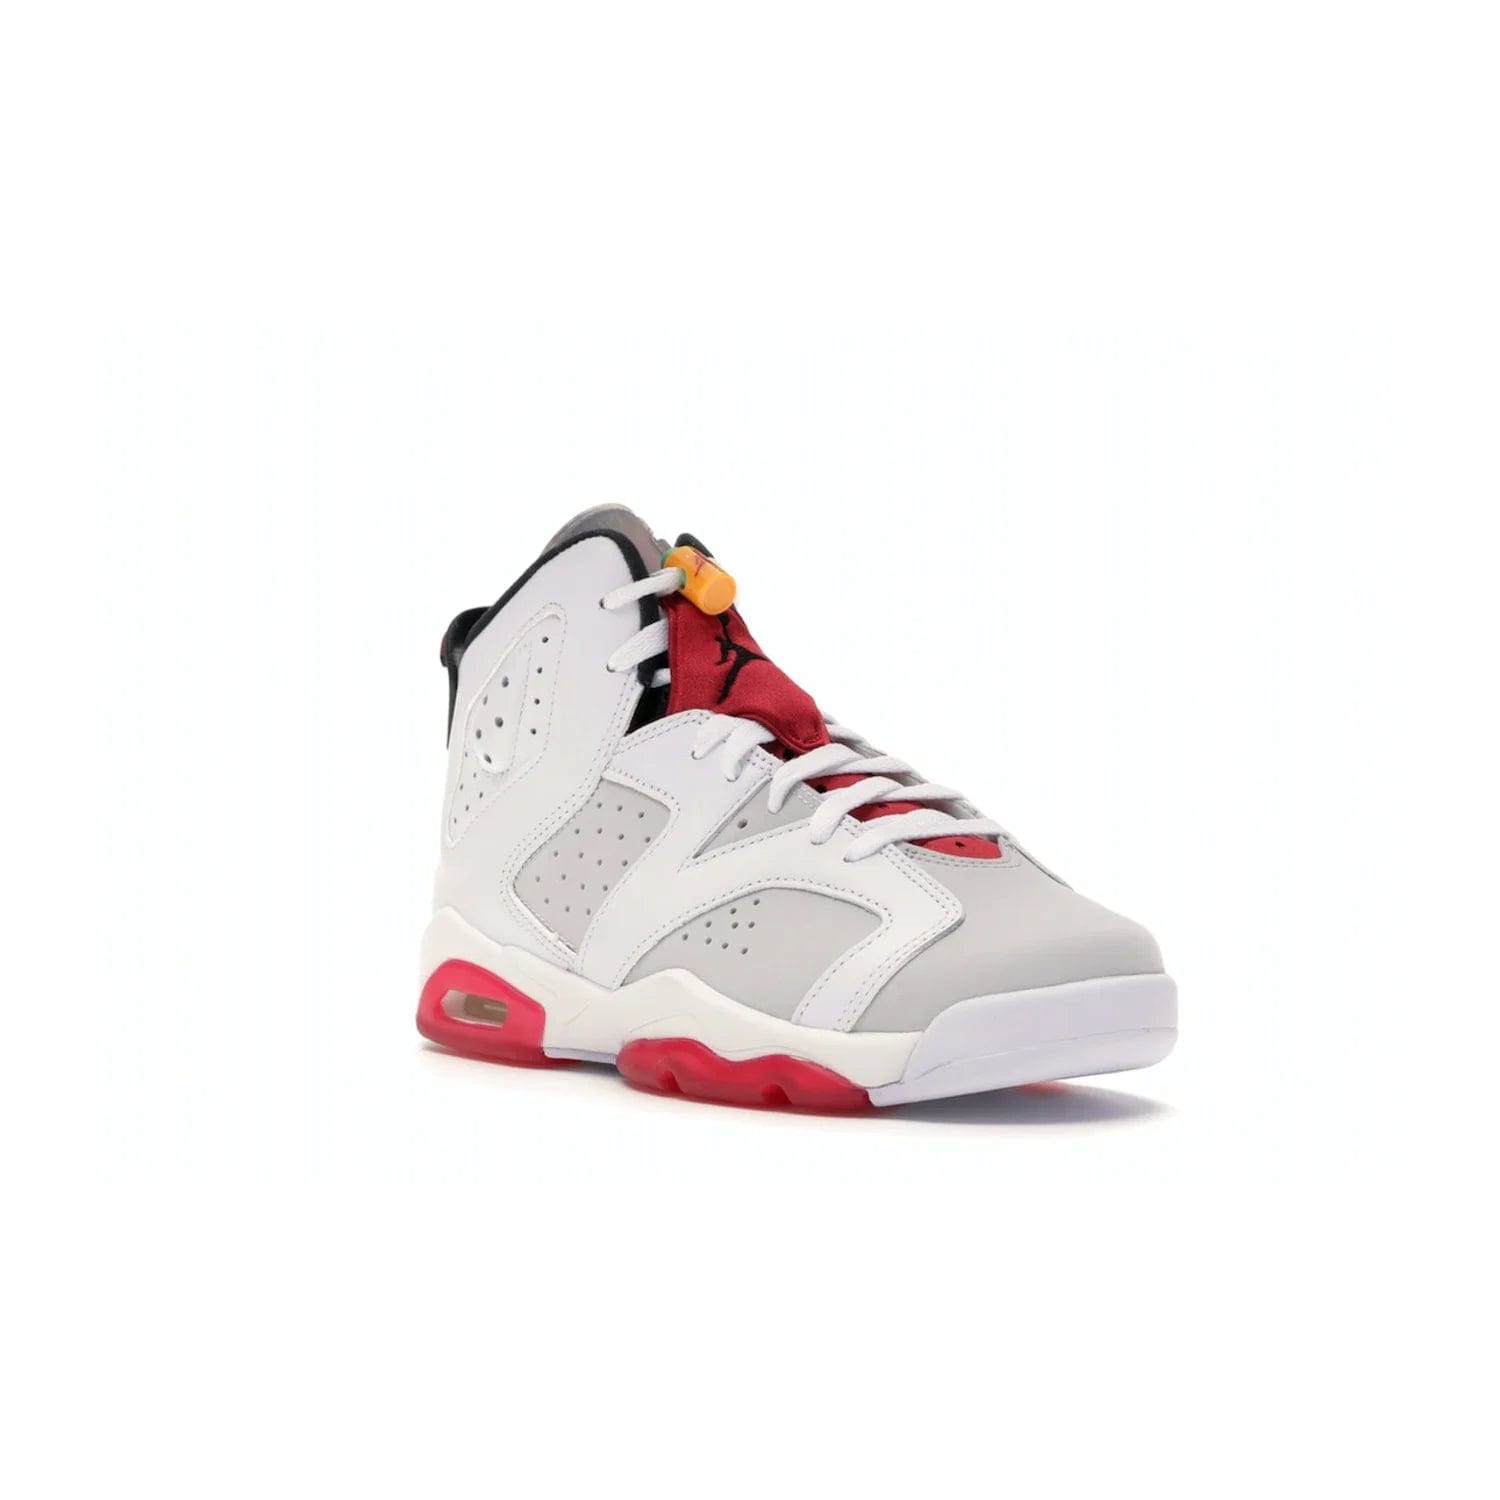 Jordan 6 Retro Hare (GS) - Image 6 - Only at www.BallersClubKickz.com - The Air Jordan 6 Hare GS. Comfortable suede upper, perforations, red pods, two-tone midsole, and signature "Jumpman" emblem. Released 17 June 2020. Perfect for any sneakerhead.